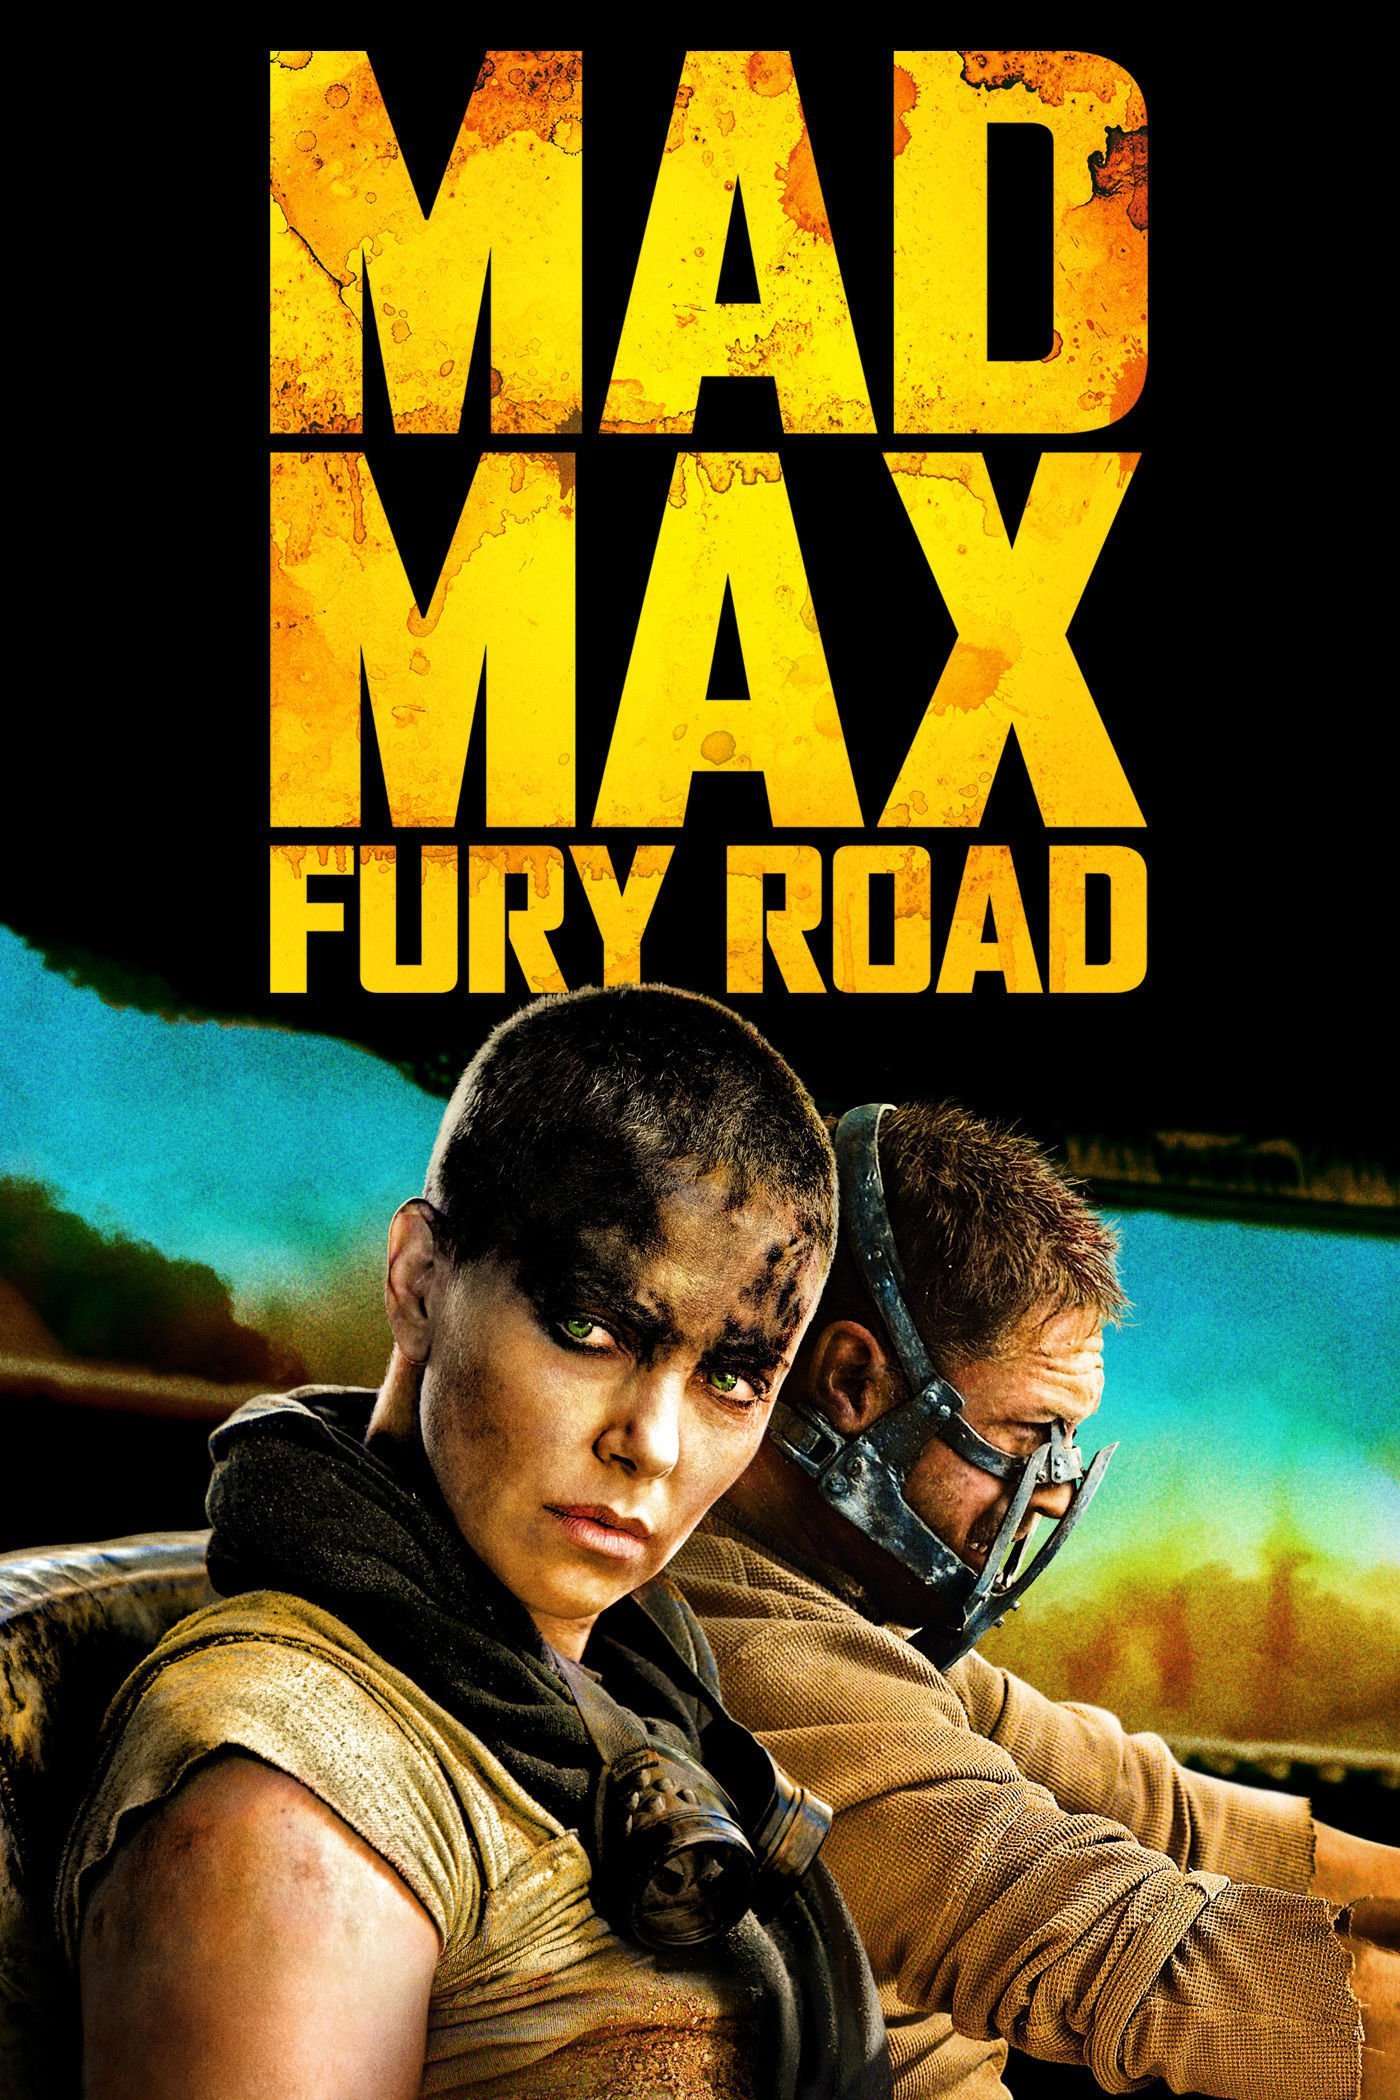 Poster for the filmen "Mad Max: Fury Road"